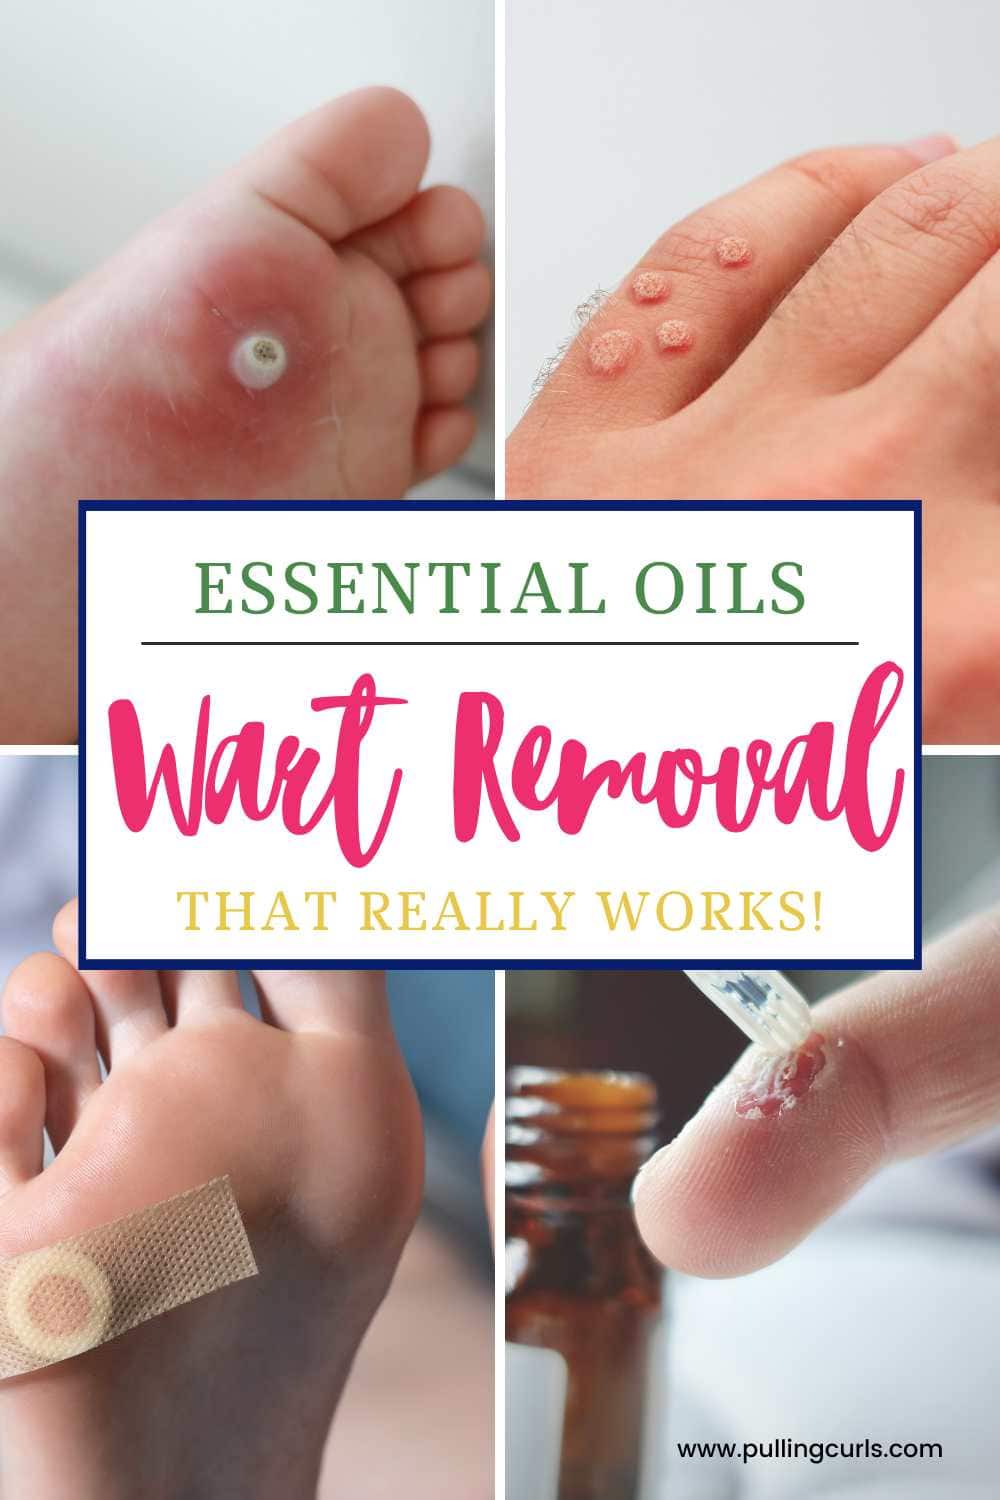 Discover the power of essential oils for wart removal! Using tea tree, oregano, apple cider vinegar and more, we can create a DIY home remedy to banish those unsightly warts. Don't let warts bother you any longer, try this natural remedy today! via @pullingcurls